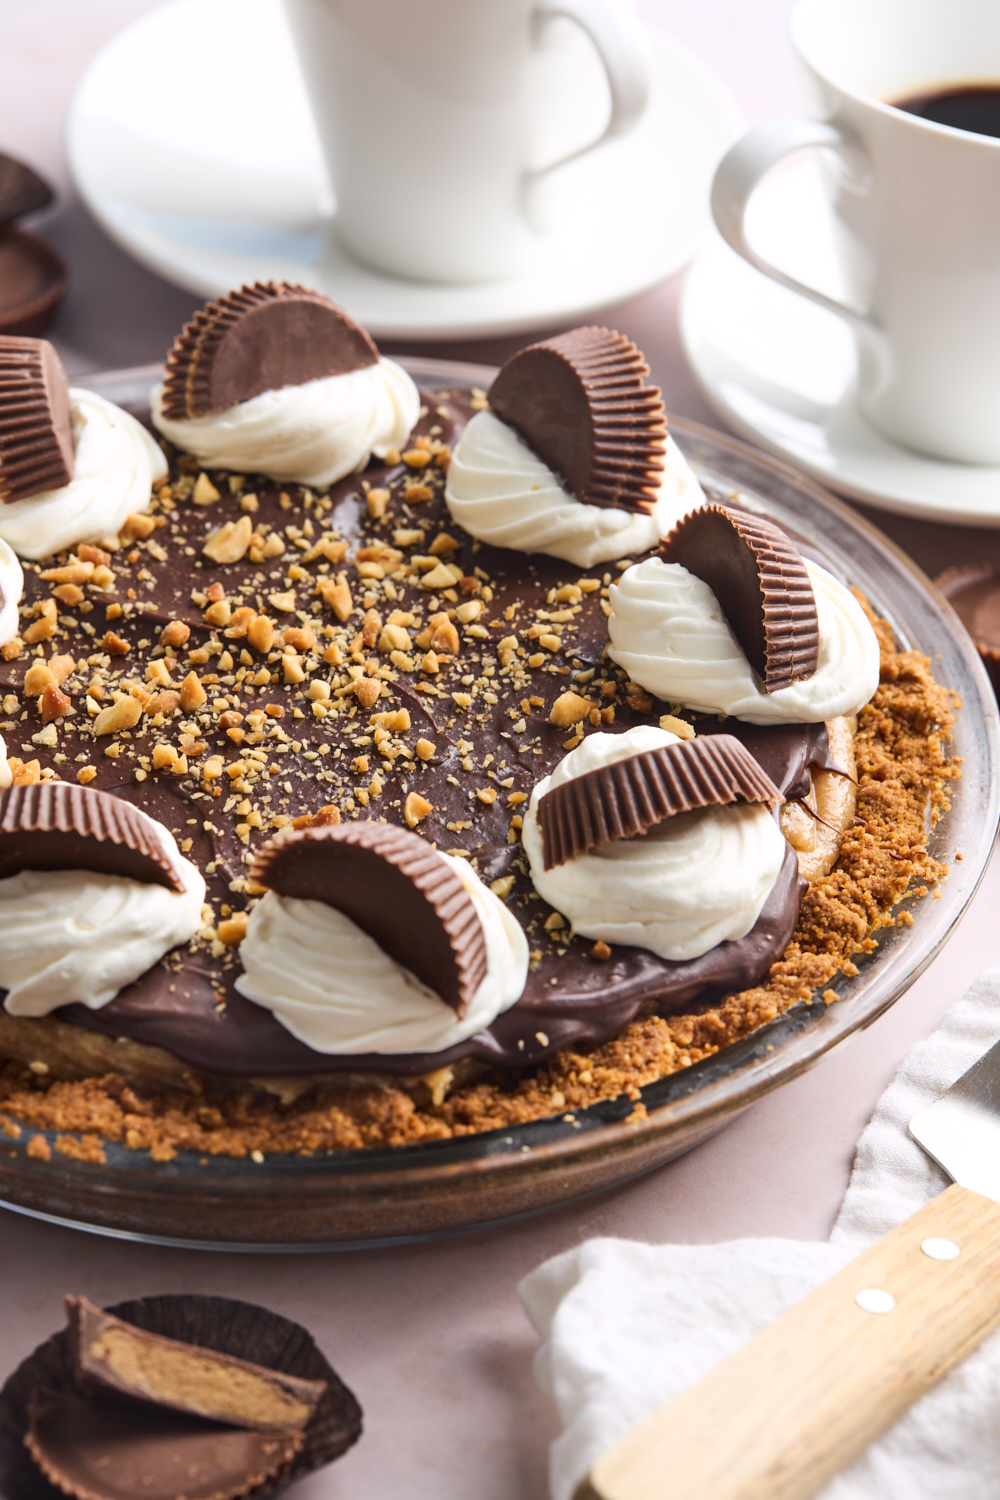 Reese’s Peanut Butter Cup Pie